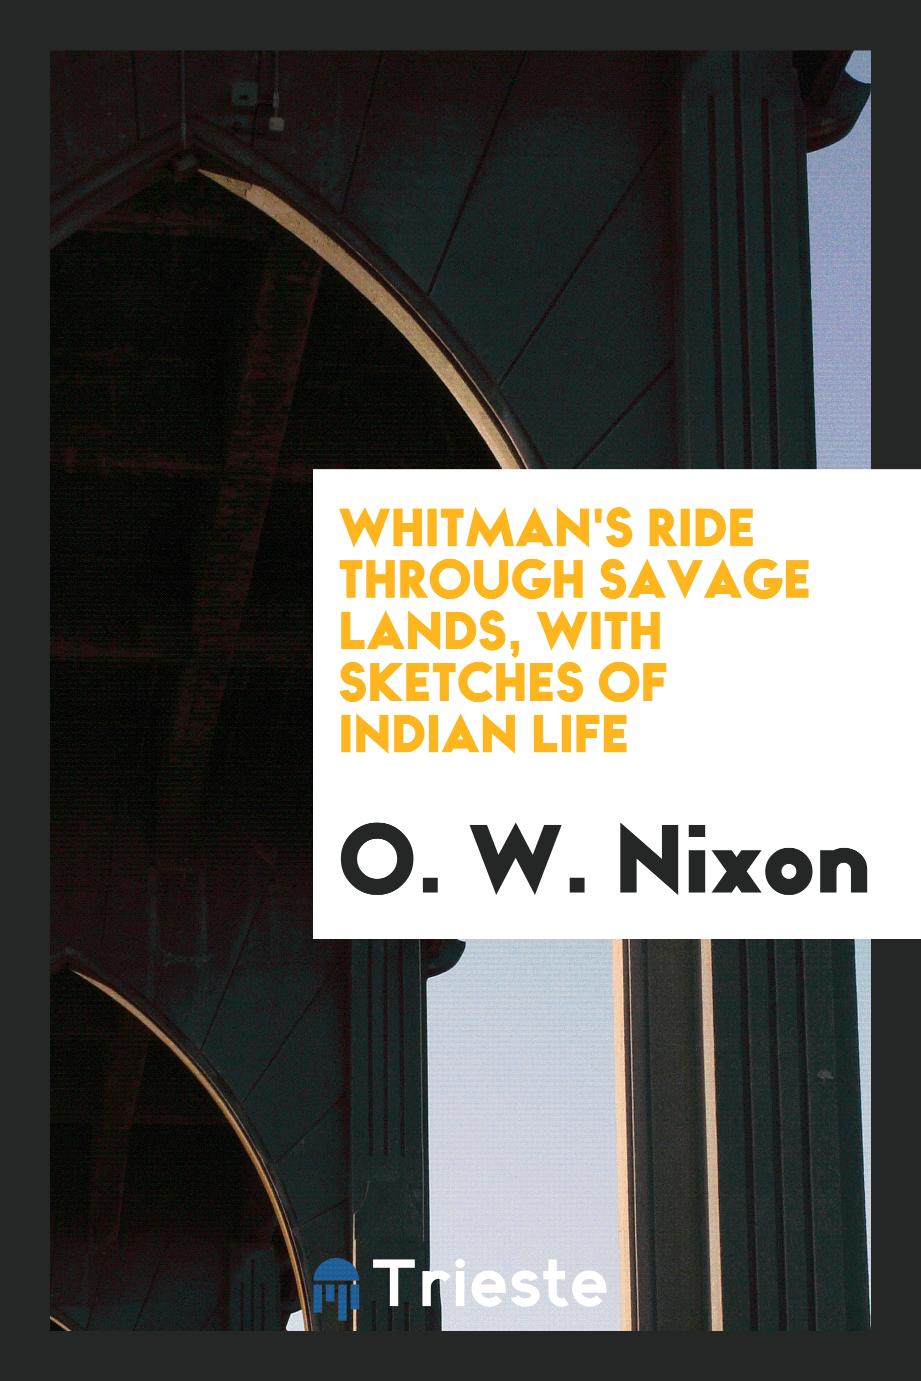 Whitman's ride through savage lands, with sketches of Indian life